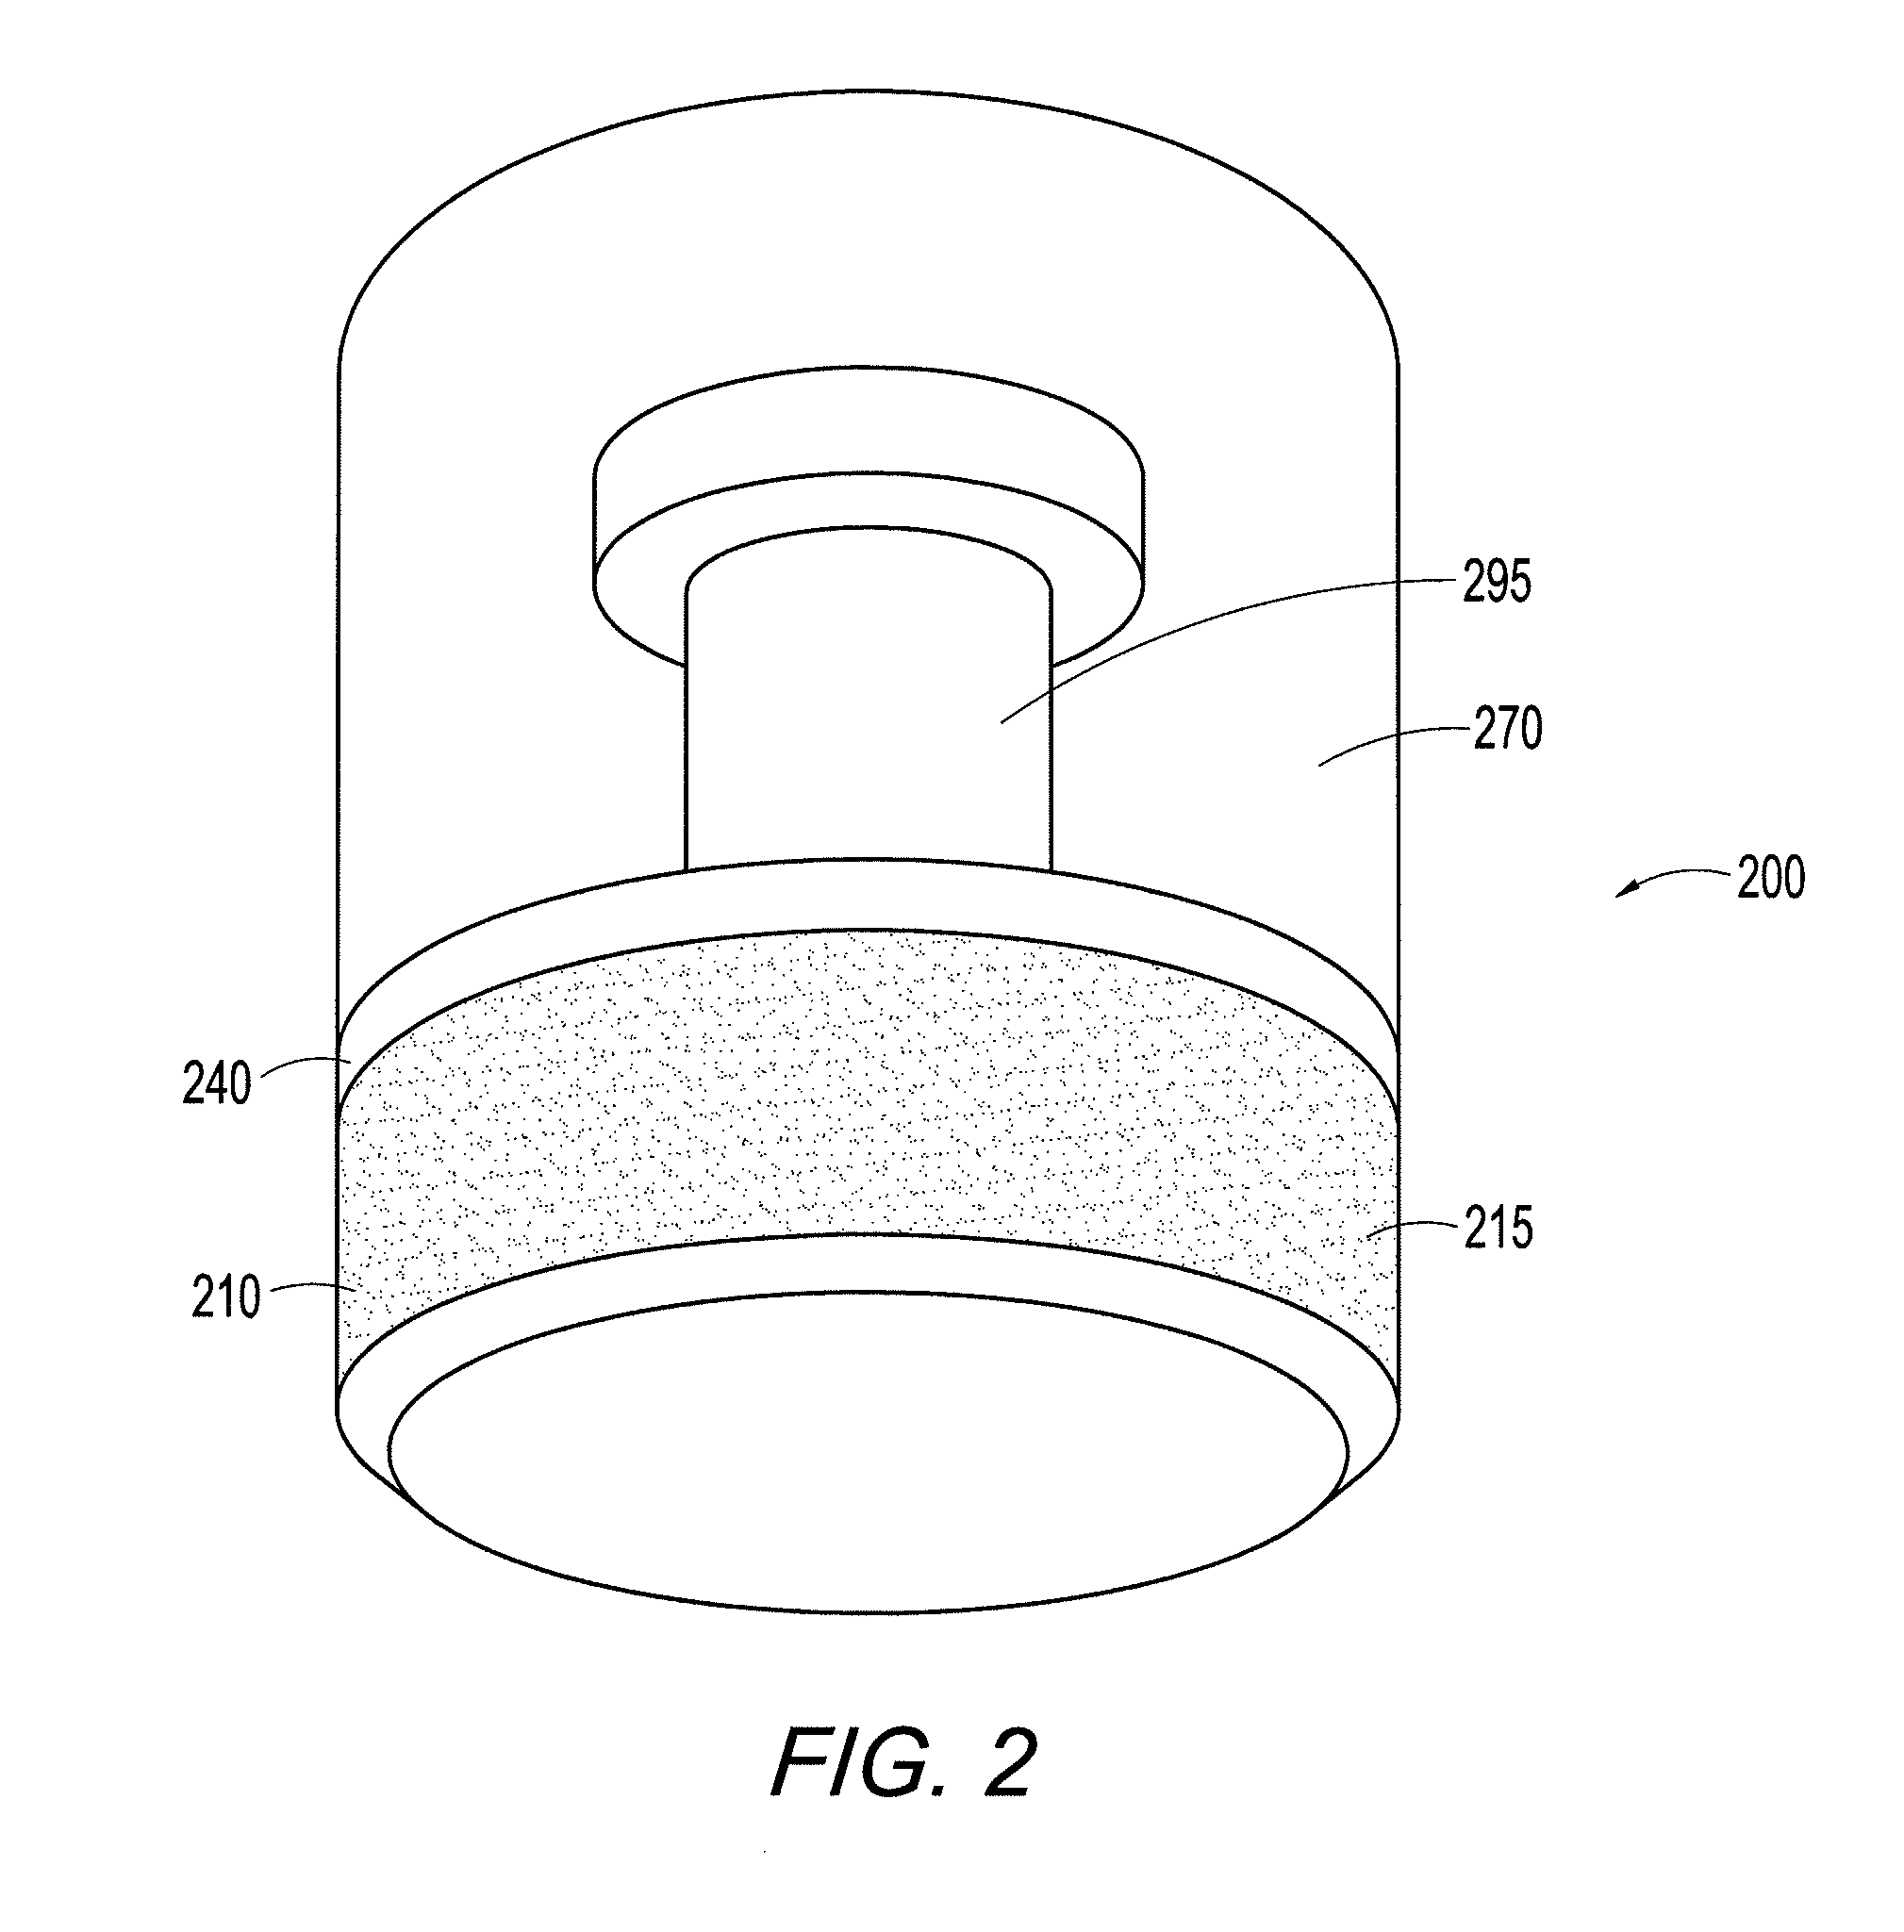 Hybrid polymer/metal plug for treating chondral defects